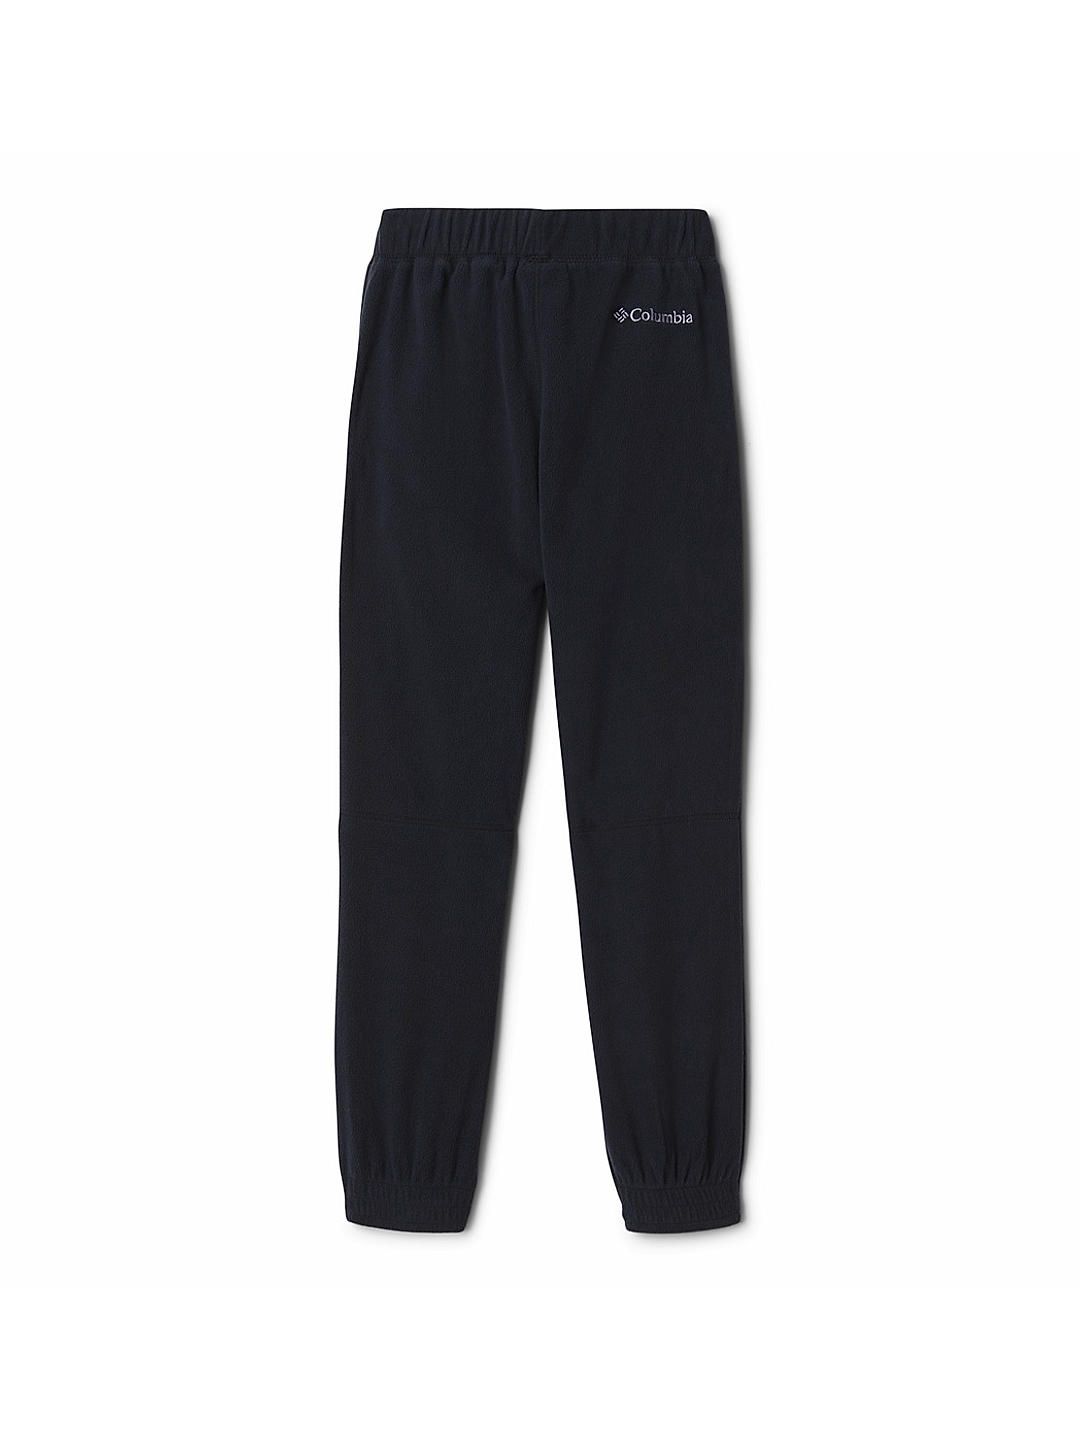 Tall Men's Jogger Sweatpants - Redwood Tall Outfitters